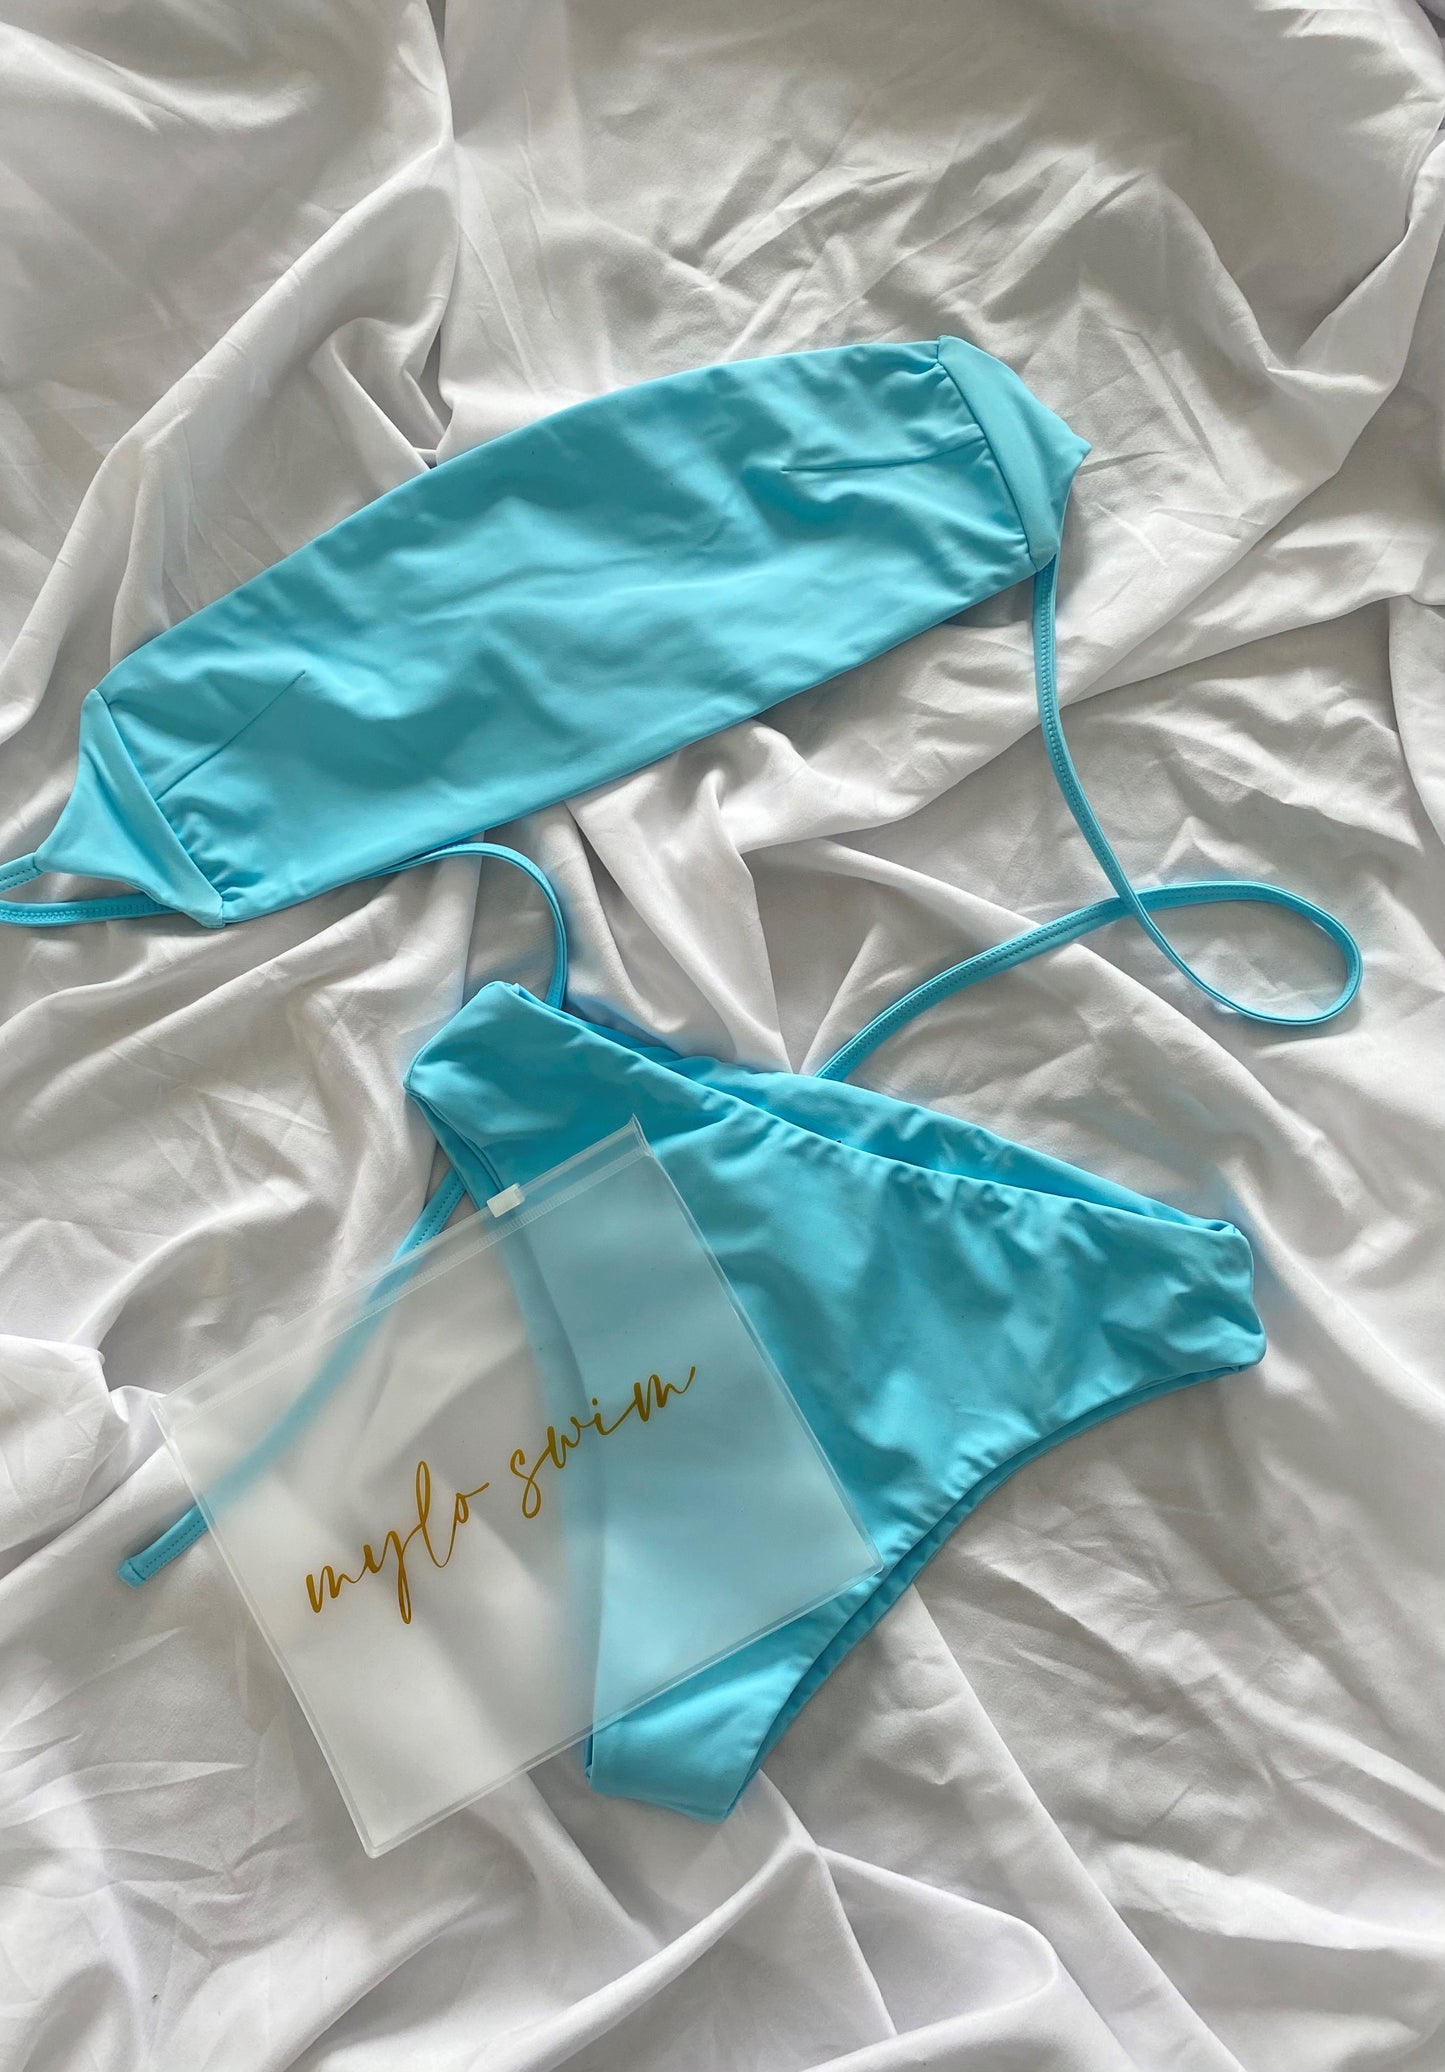 Biodegradable ziploc pouch for wet swimwear or beach items. Pouch has mylo swim scripted in gold across. Sitting with the ocen blue Amalfi strapless top and high waisted swimwear bottoms.